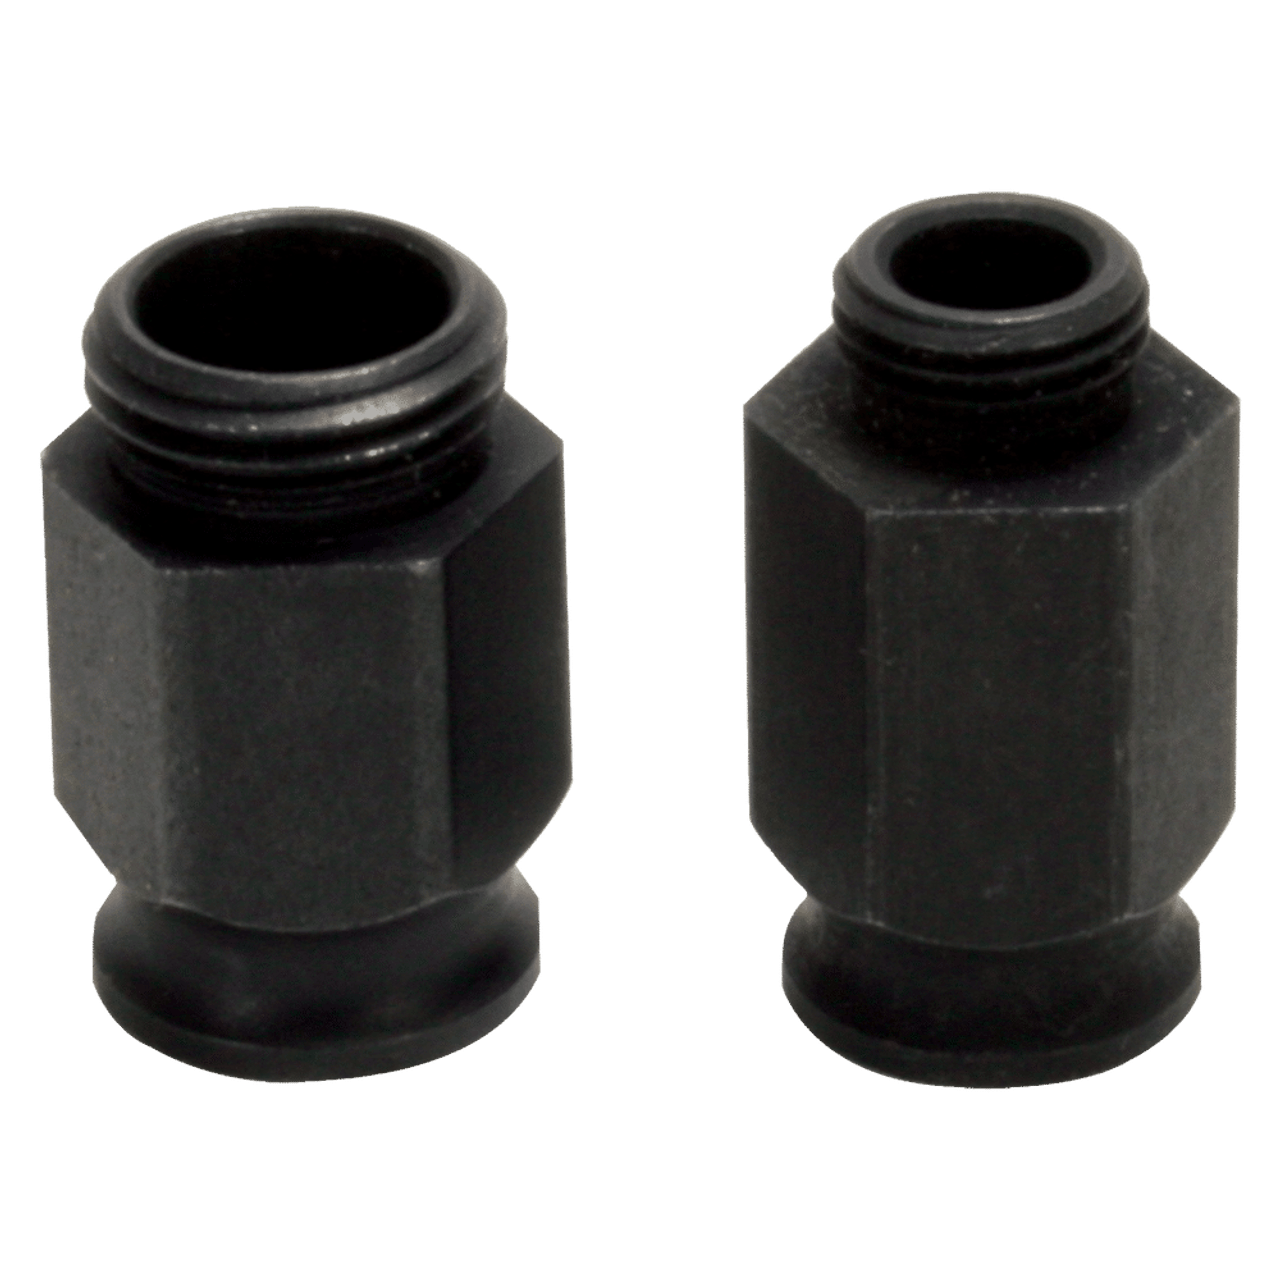 Diablo DHSNUT2 1/2 in. and 5/8 in. Hole Saw Adapter Nuts